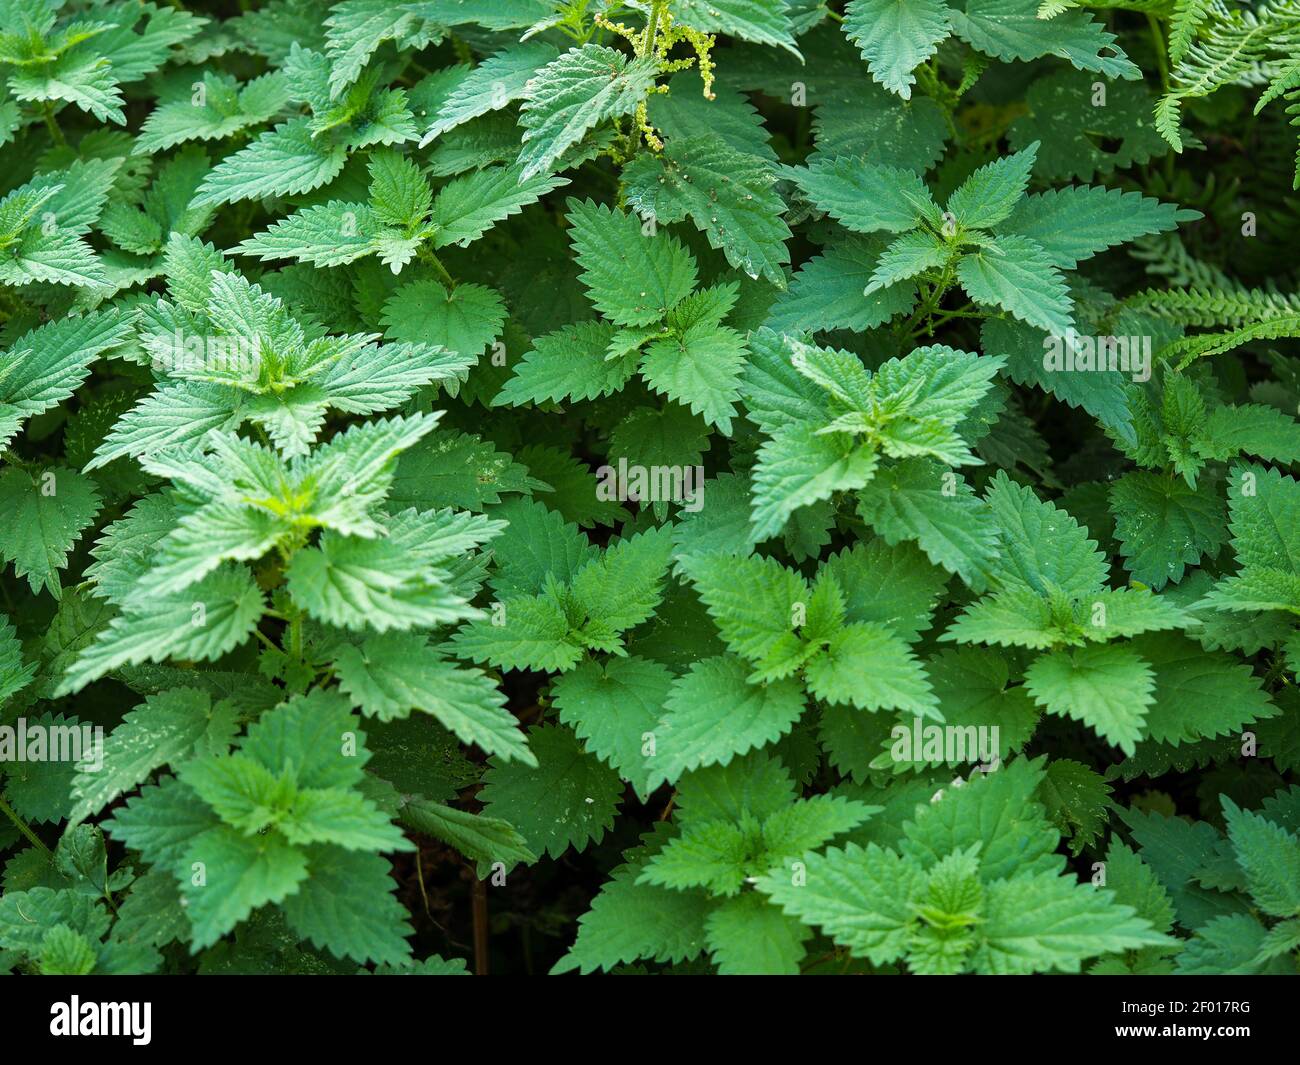 Closeup of the green leaves of common nettle plants, Urtica dioica Stock Photo